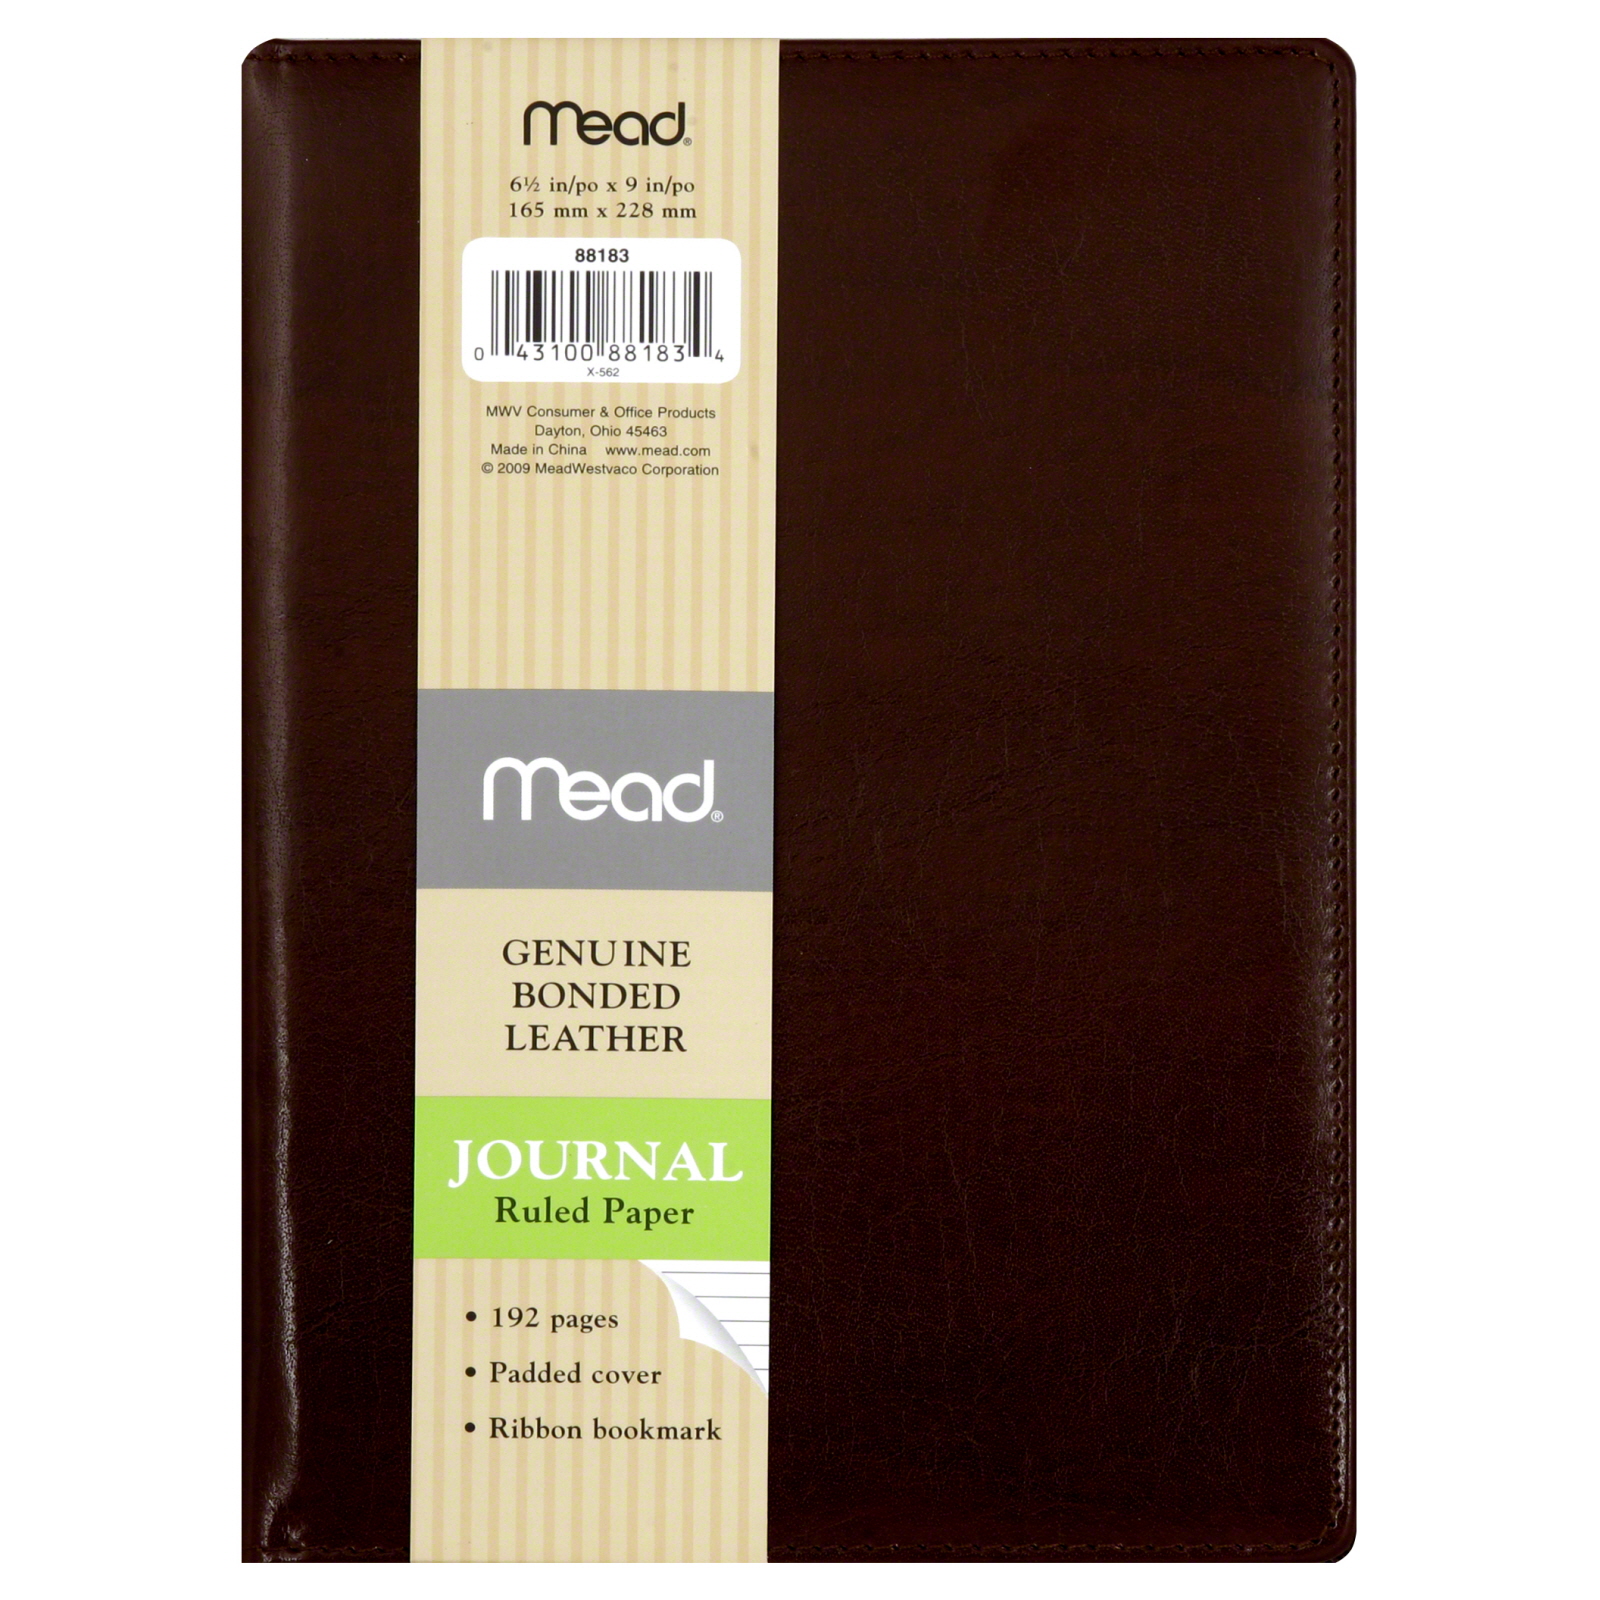 Mead Journal, Ruled Paper, Genuine Bonded Leather 1 journal